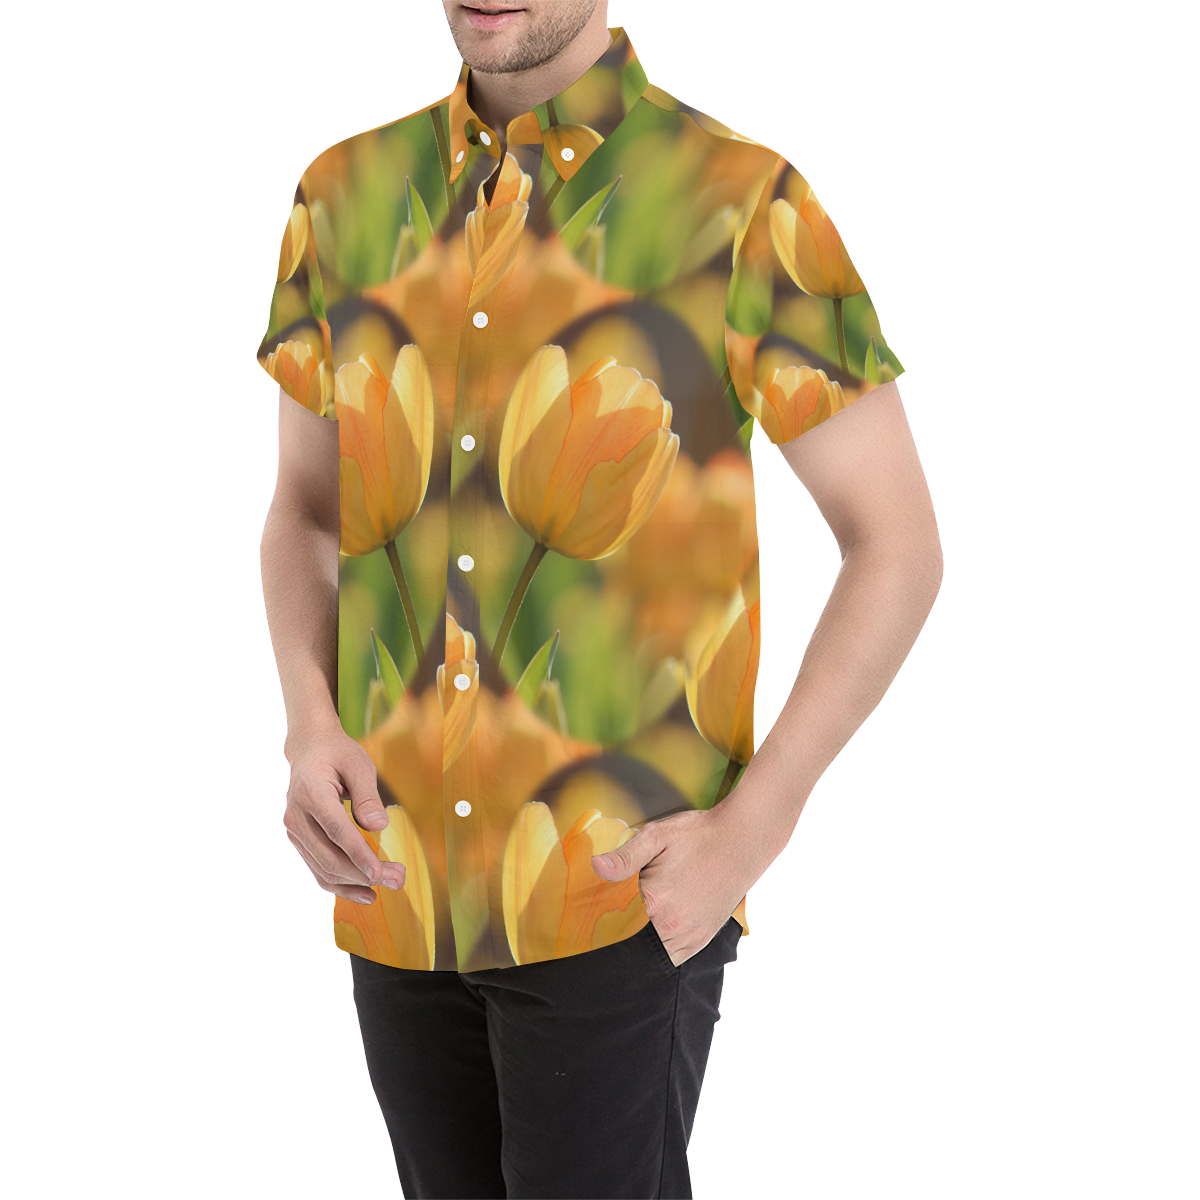 Tulip20170438_by_JAMColors Men's All Over Print Short Sleeve Shirt (Model T53)